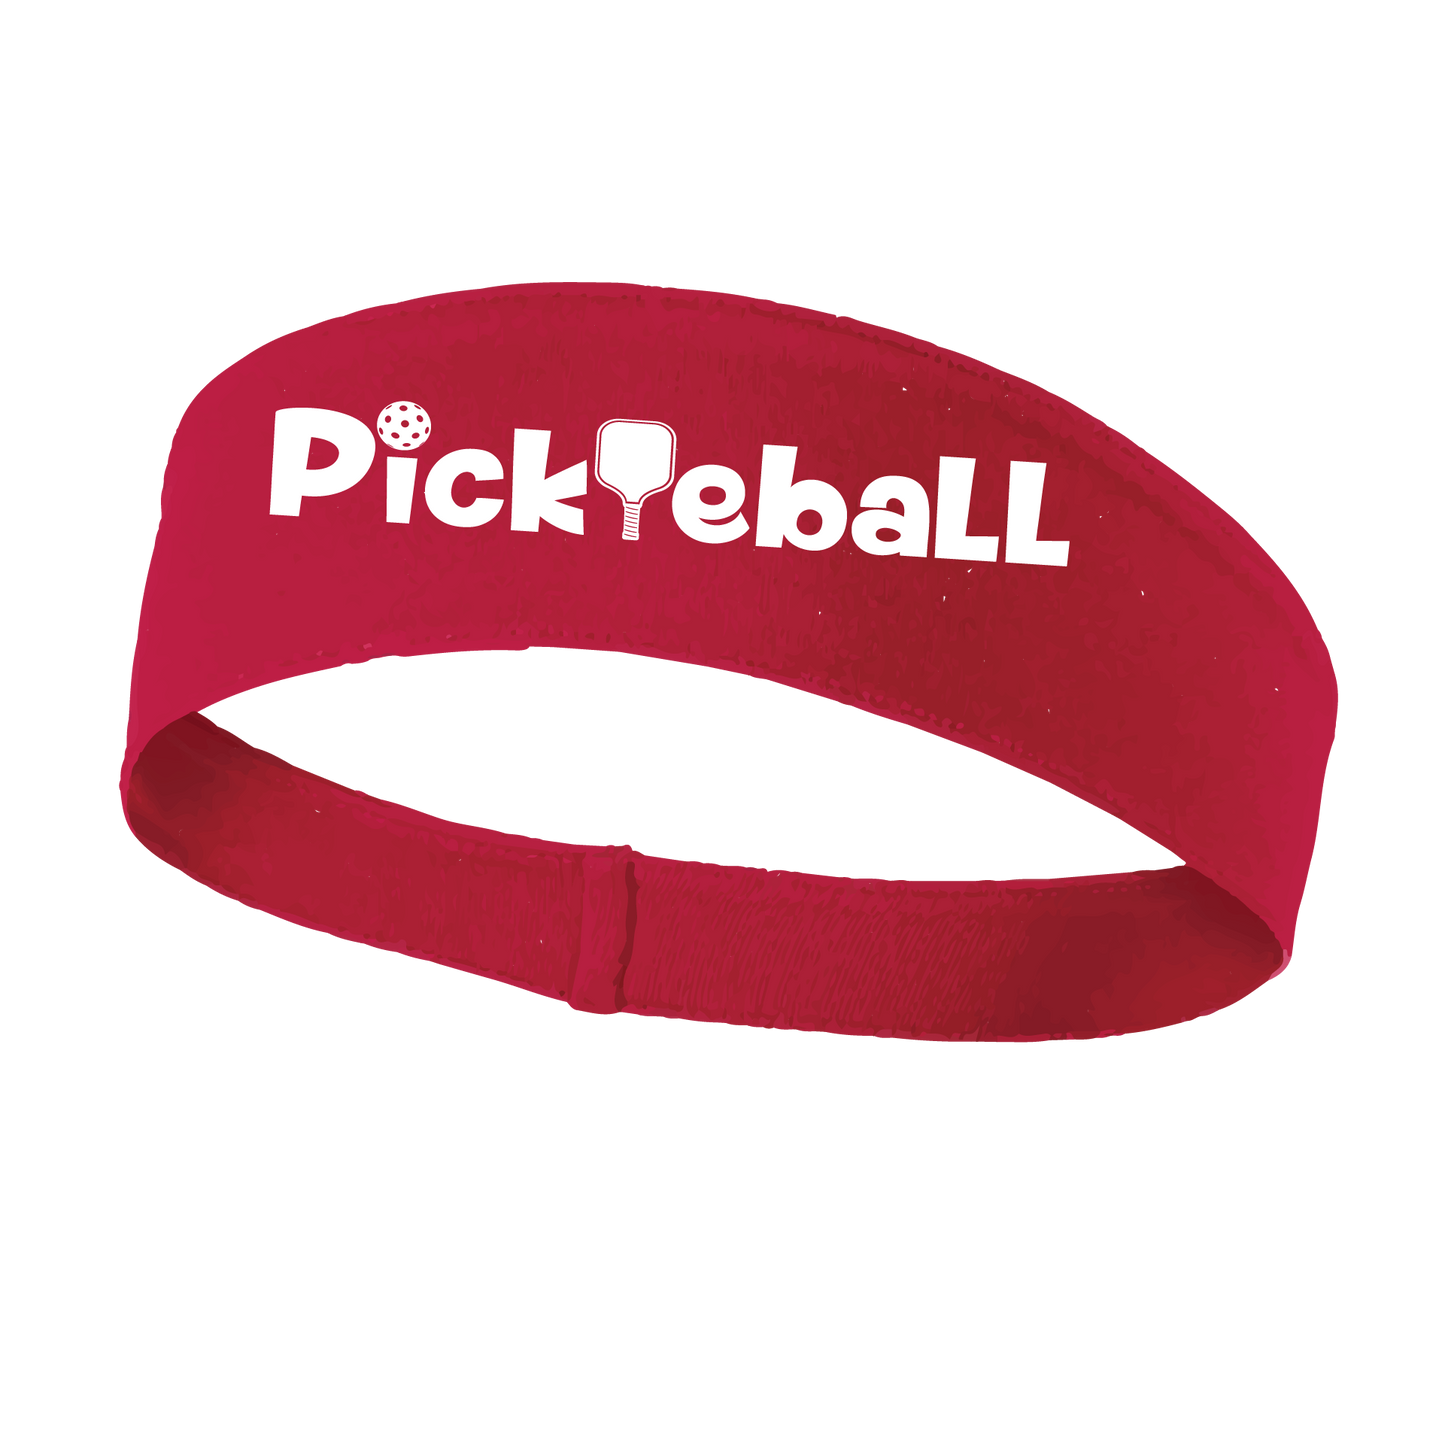 Pickleball Design: Pickleball words in white  This fun, pickleball designed, moisture-wicking headband narrows in the back to fit more securely. Single-needle top-stitched edging. These headbands come in a variety of colors. Truly shows your love for the sport of pickleball!!